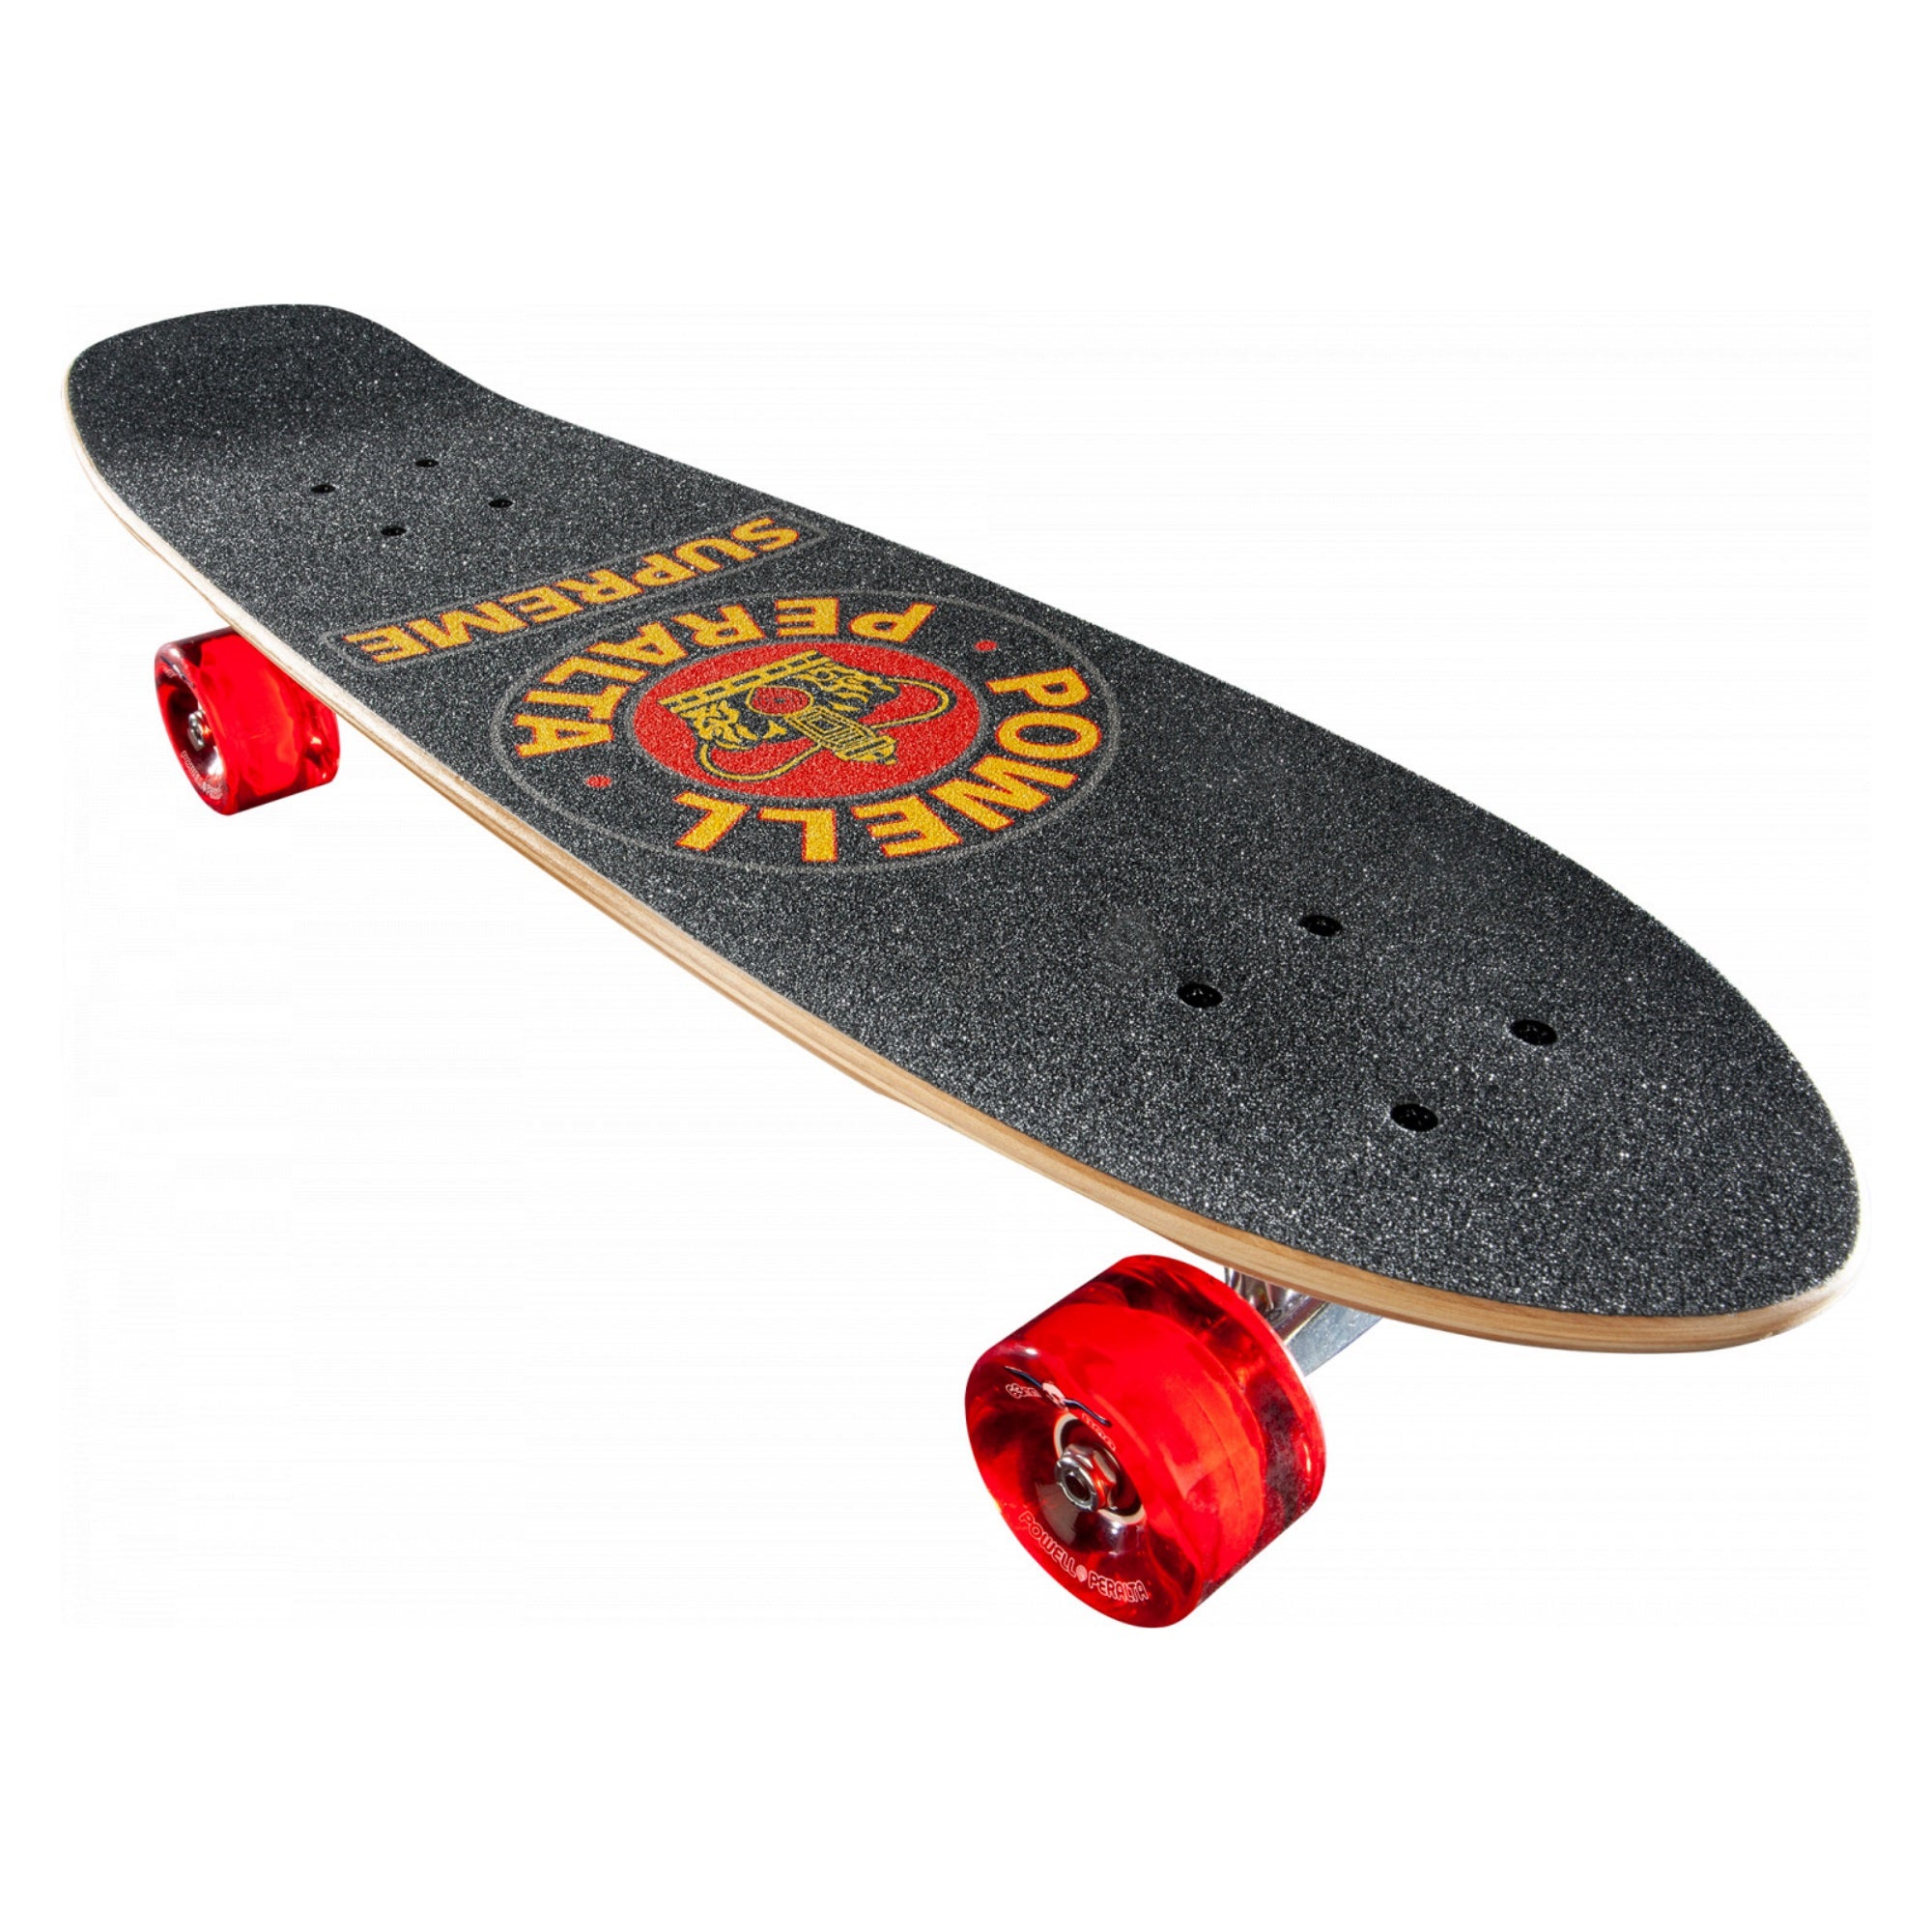 POWELL PERALTA SW SURFER SUPREME SKATEBOARD COMPLETE 7.75x27.2 WHT/RED